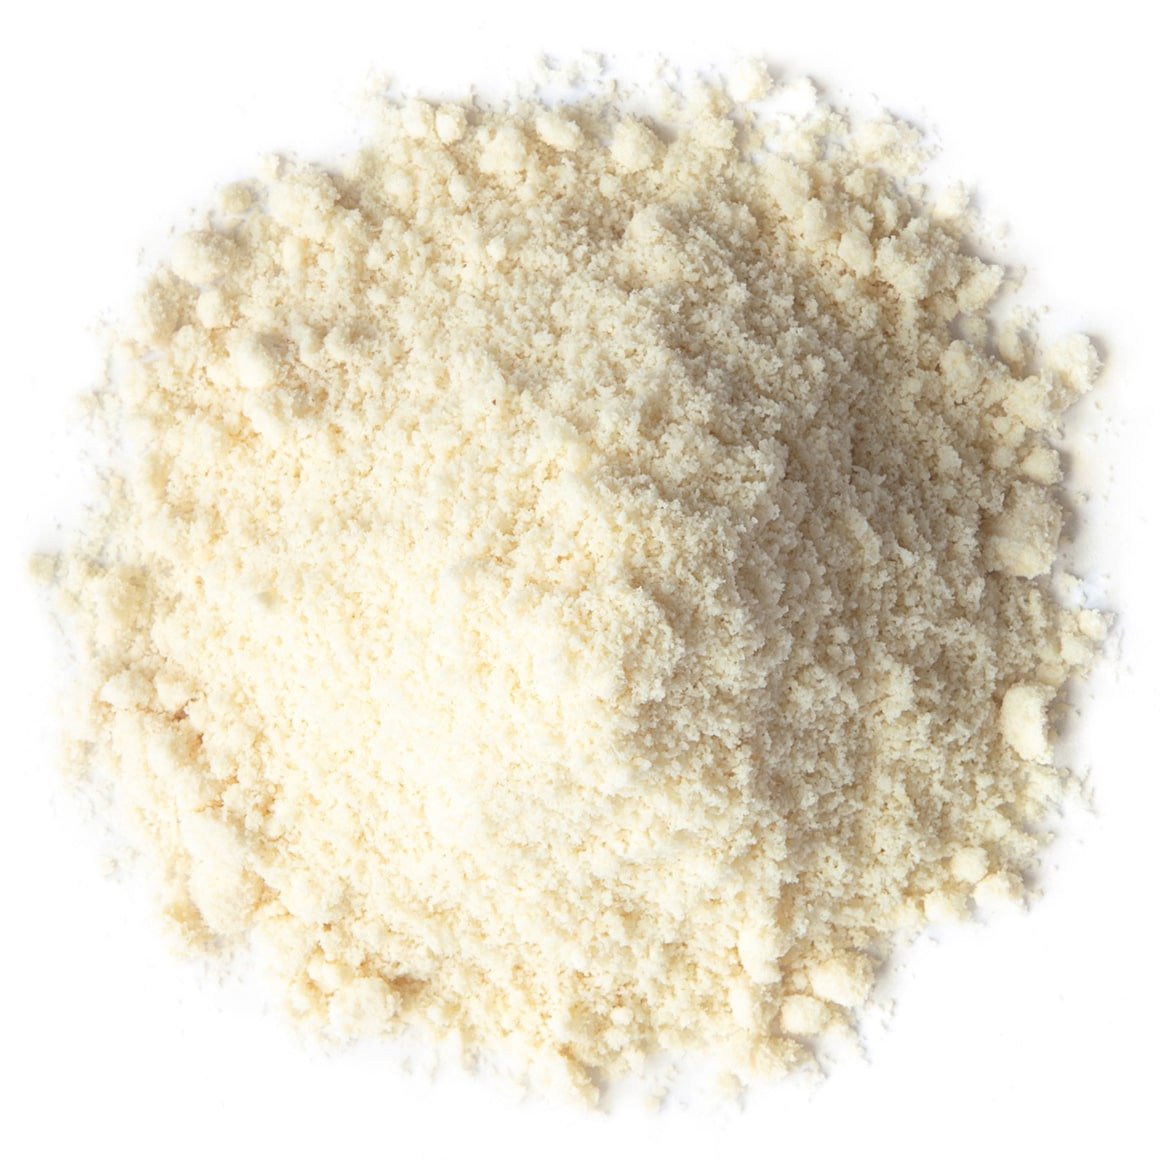 Organic Blanched Almond Flour